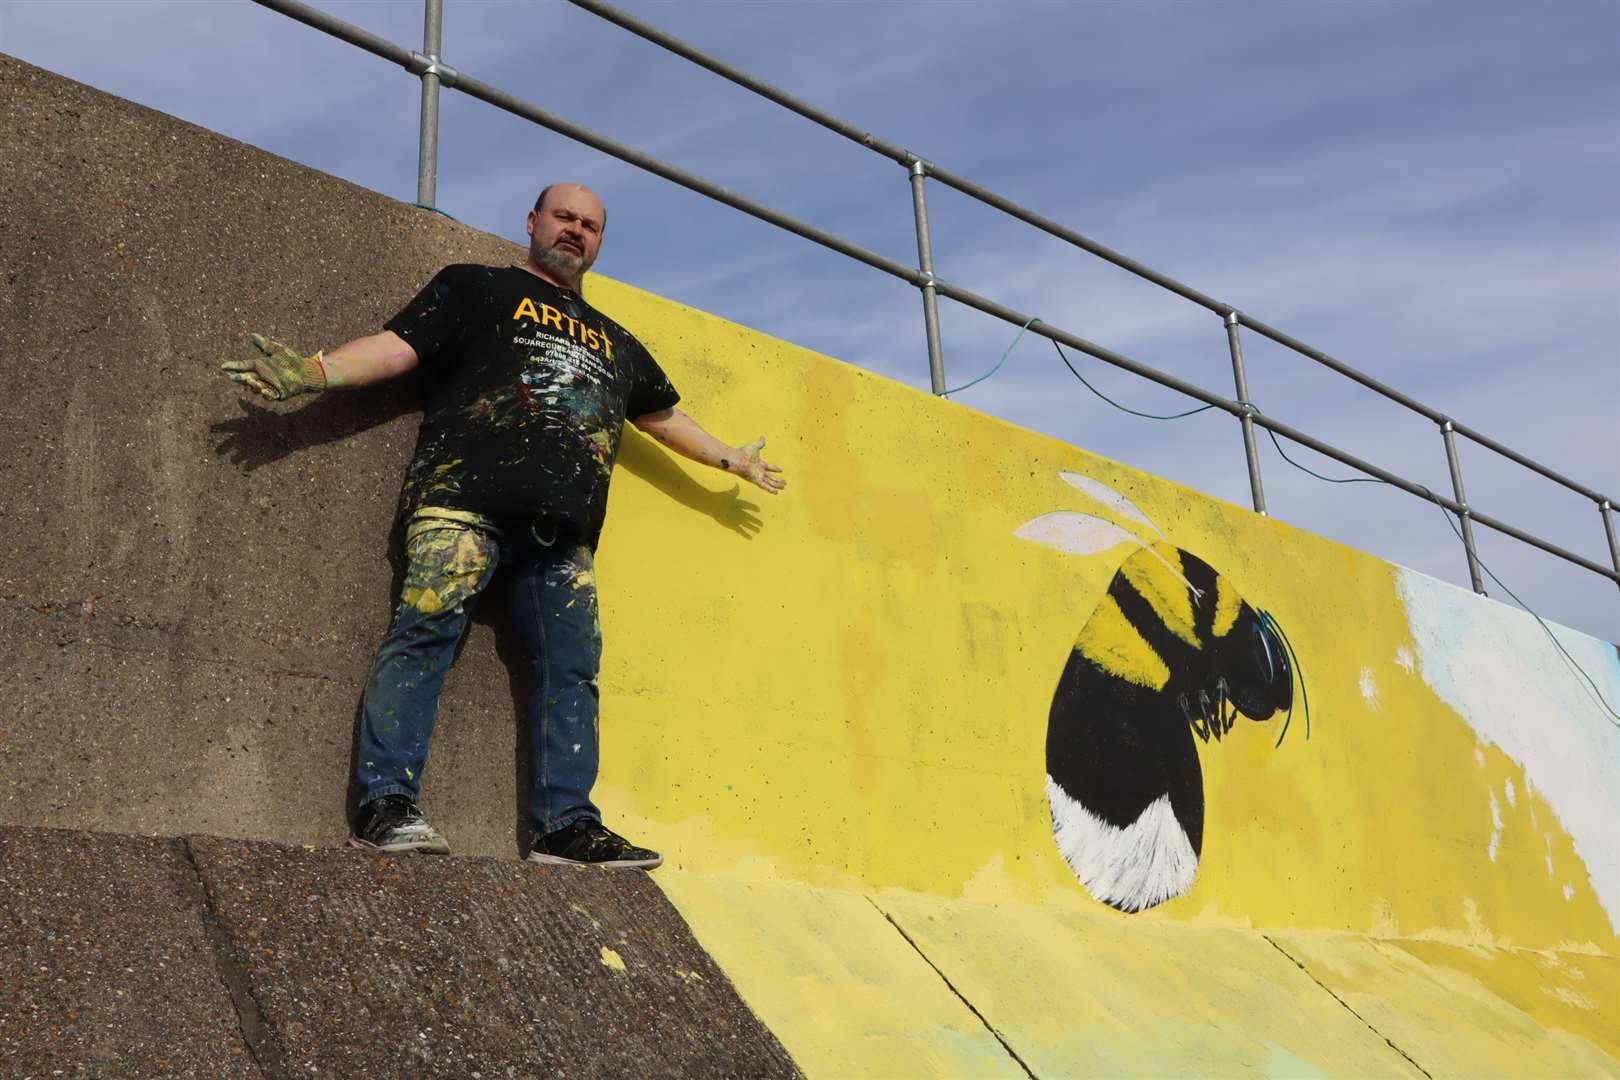 Sheppey artist Richard Jeferies at work painting a giant bee on the seawall at Barton's Point, Sheerness (32033652)